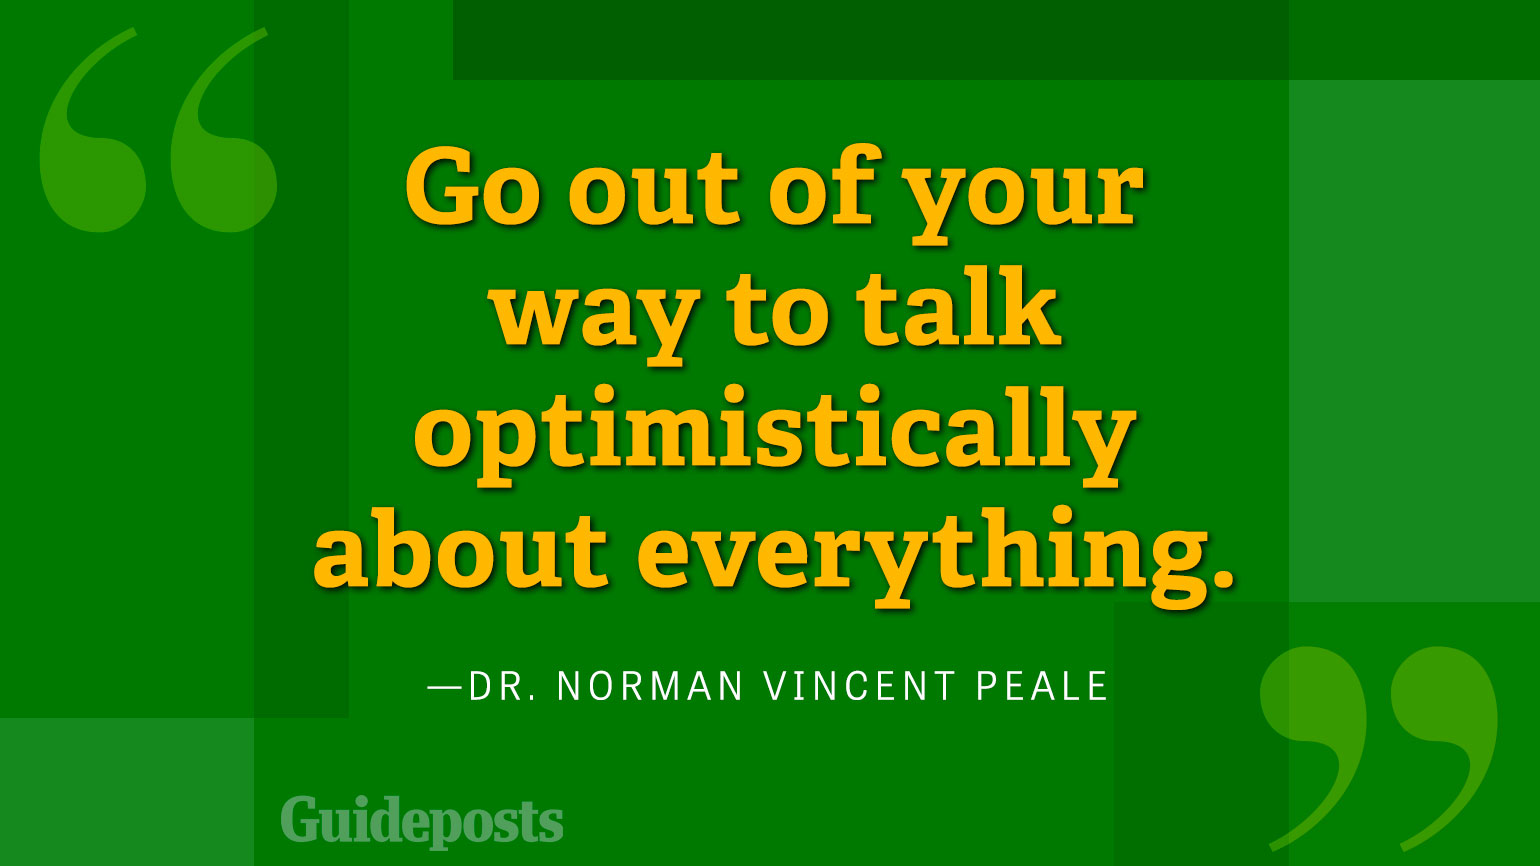 Go out of your way to talk optimisitically about everything.